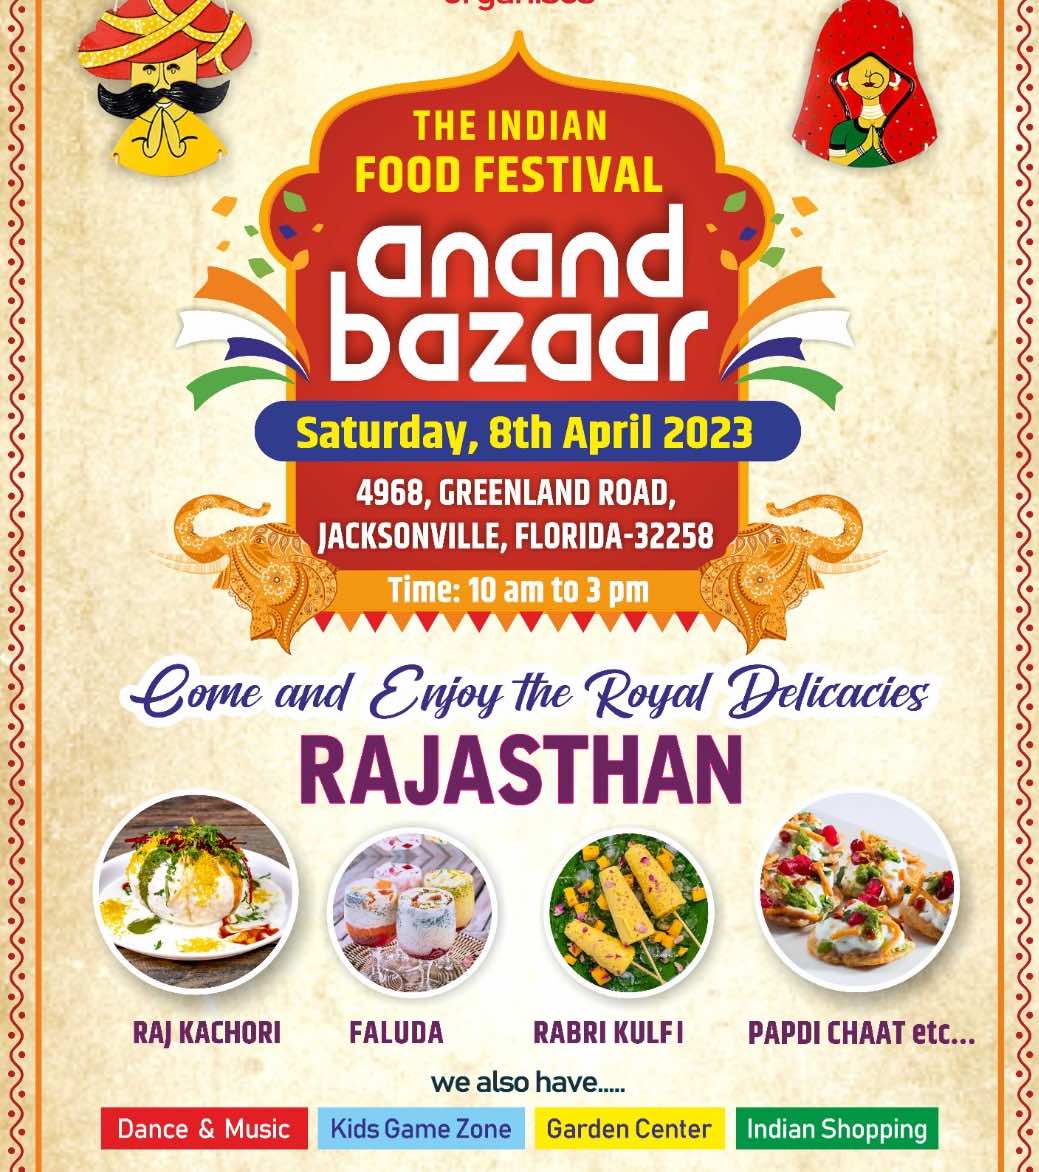 THE INDIAN FOOD FESTIVAL anand bazaar Saturday, 8th April 2023 4968, GREENLAND ROAD, JACKSONVILLE, FLORIDA-32258 Time: 10 am to 3 pm Come and Enjoy the Royal Delicacies RAJASTHAN RAJ KACHORI FALUDA RABRI KULFI PAPDI CHAAT etc. Dance & Music we also have..... Kids Game Zone Garden Center Indian Shopping